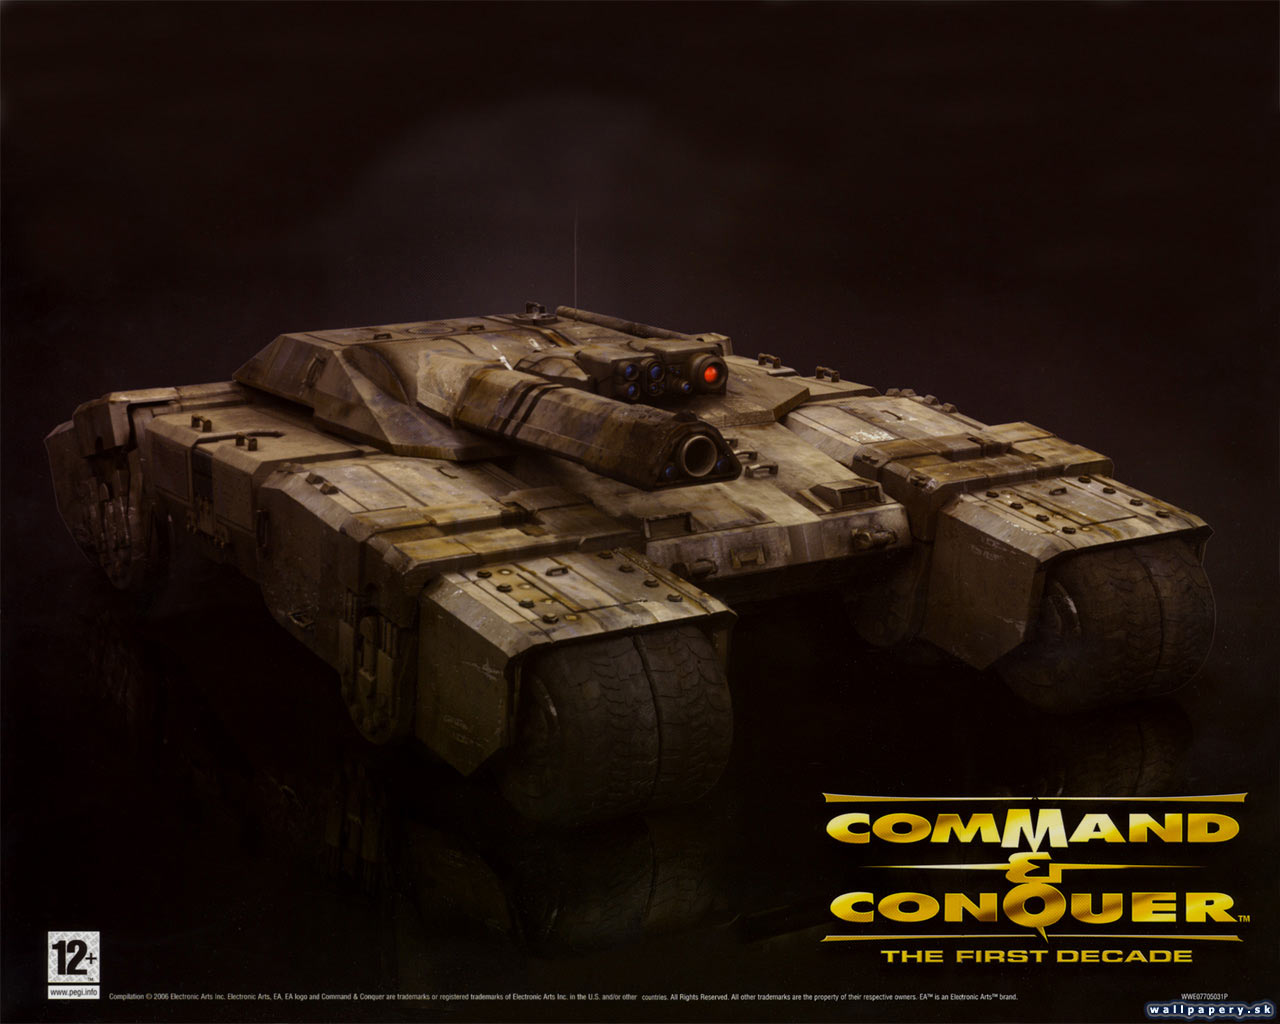 Command & Conquer: The First Decade - wallpaper 2